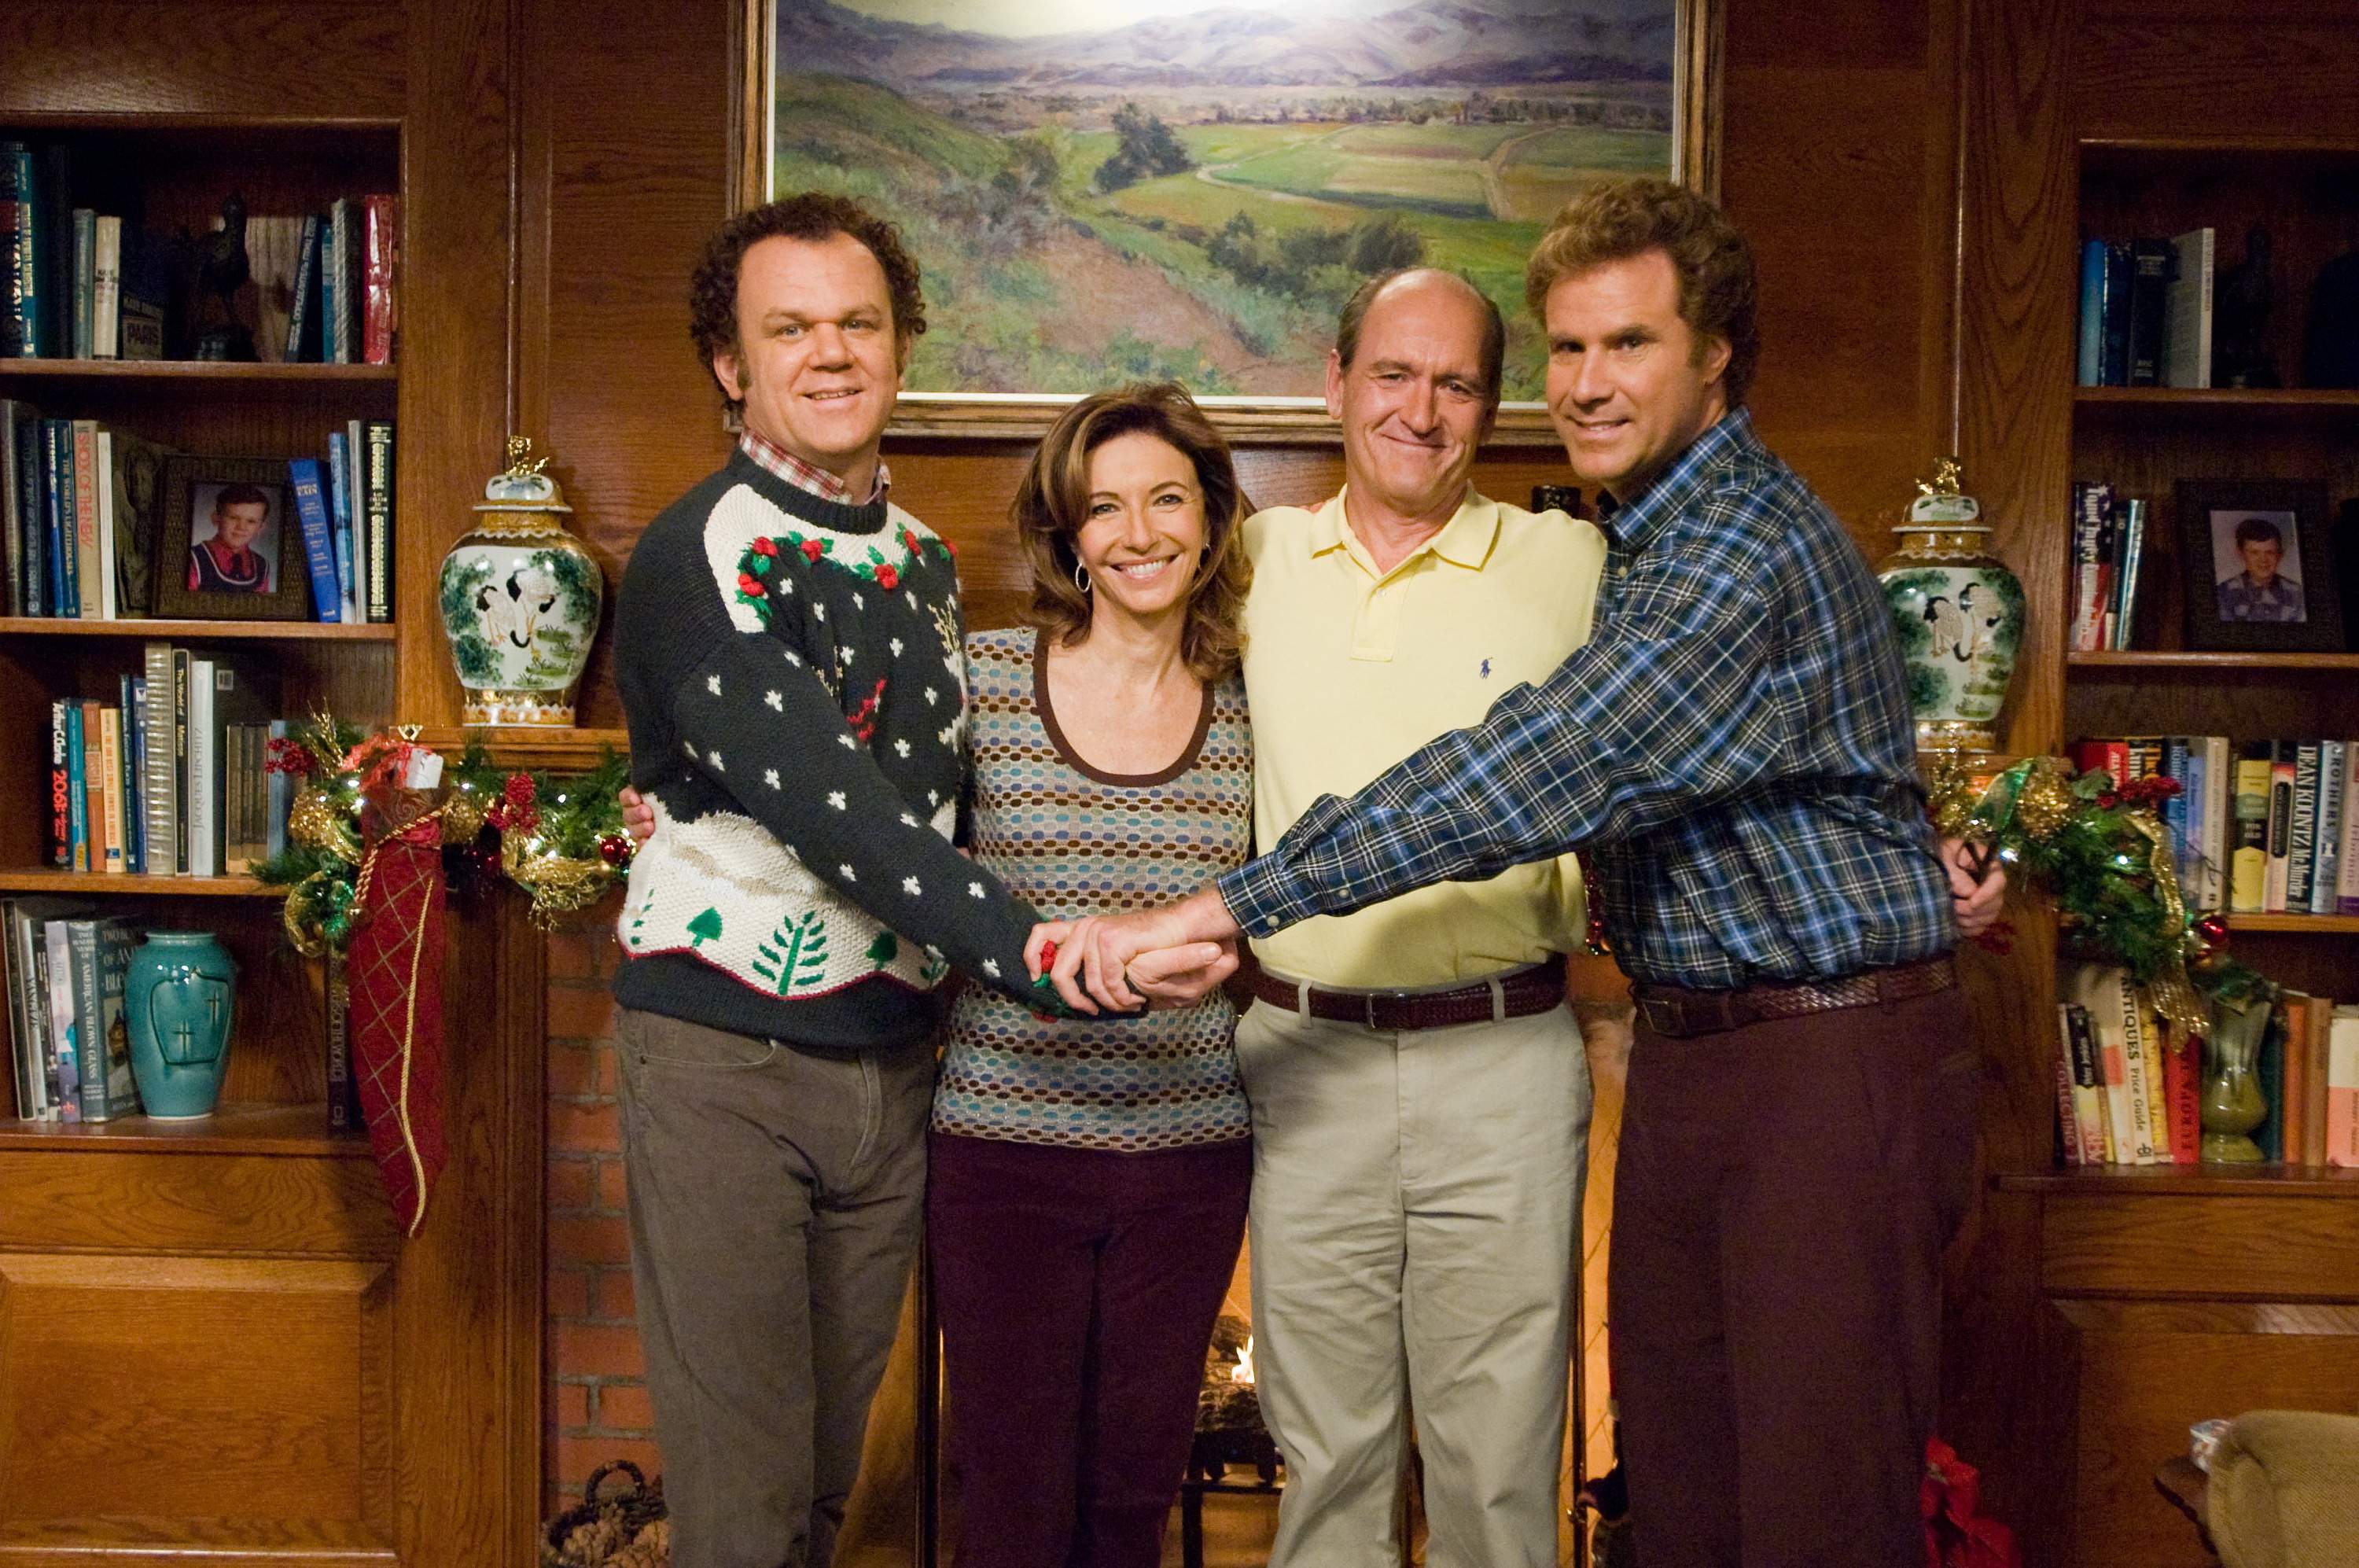 (L-R) John C. Reilly, Mary Steenburgen, Richard Jenkins and Will Ferrell star in Columbia Pictures' comedy STEP BROTHERS (2008).